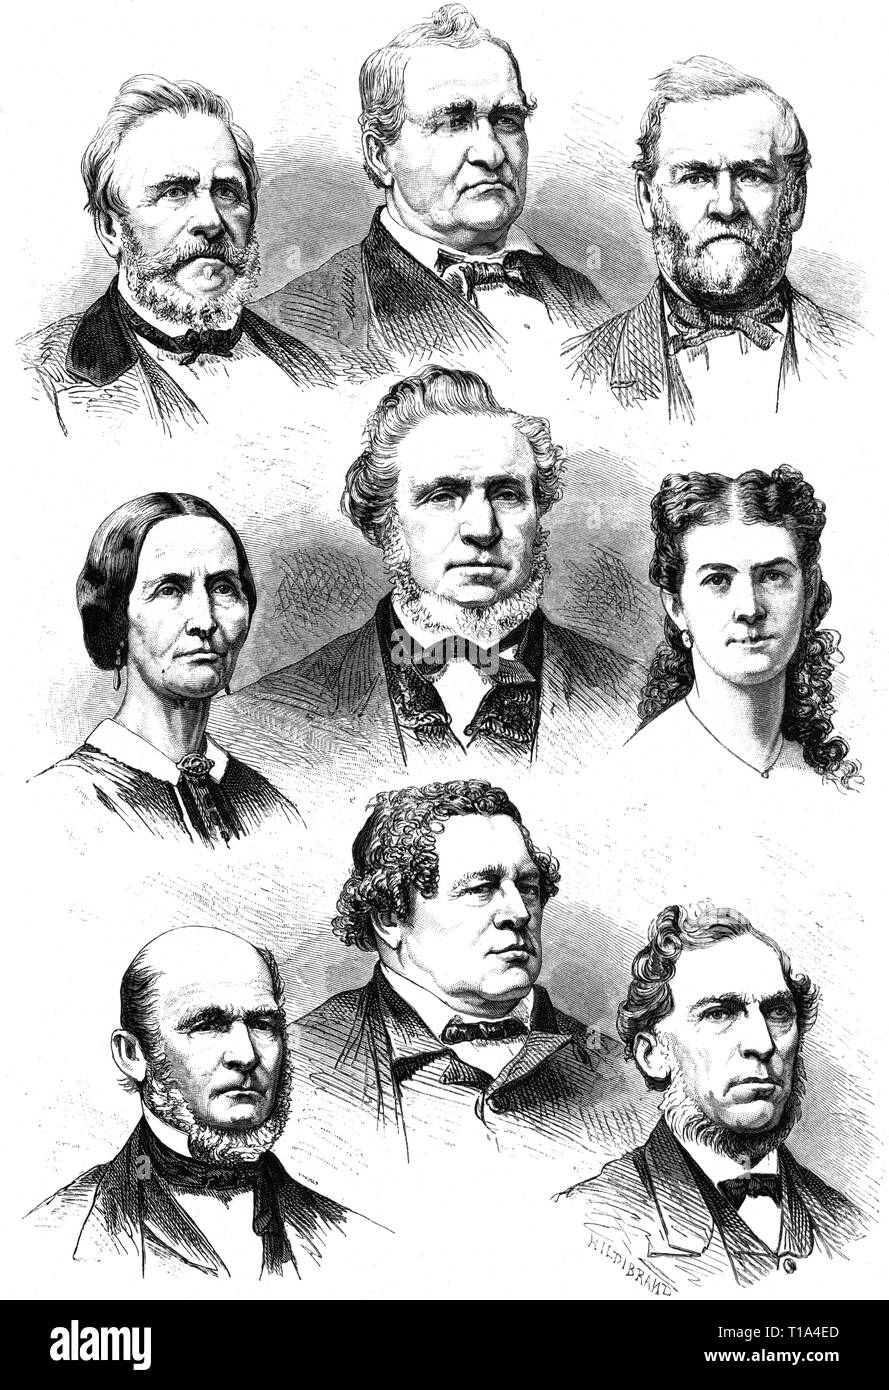 religion, sect, Mormon, prominent Mormon members, wood engraving, of Hildibrand, from: 'Globus', 25th volume, Braunschweig, 1874, Additional-Rights-Clearance-Info-Not-Available Stock Photo